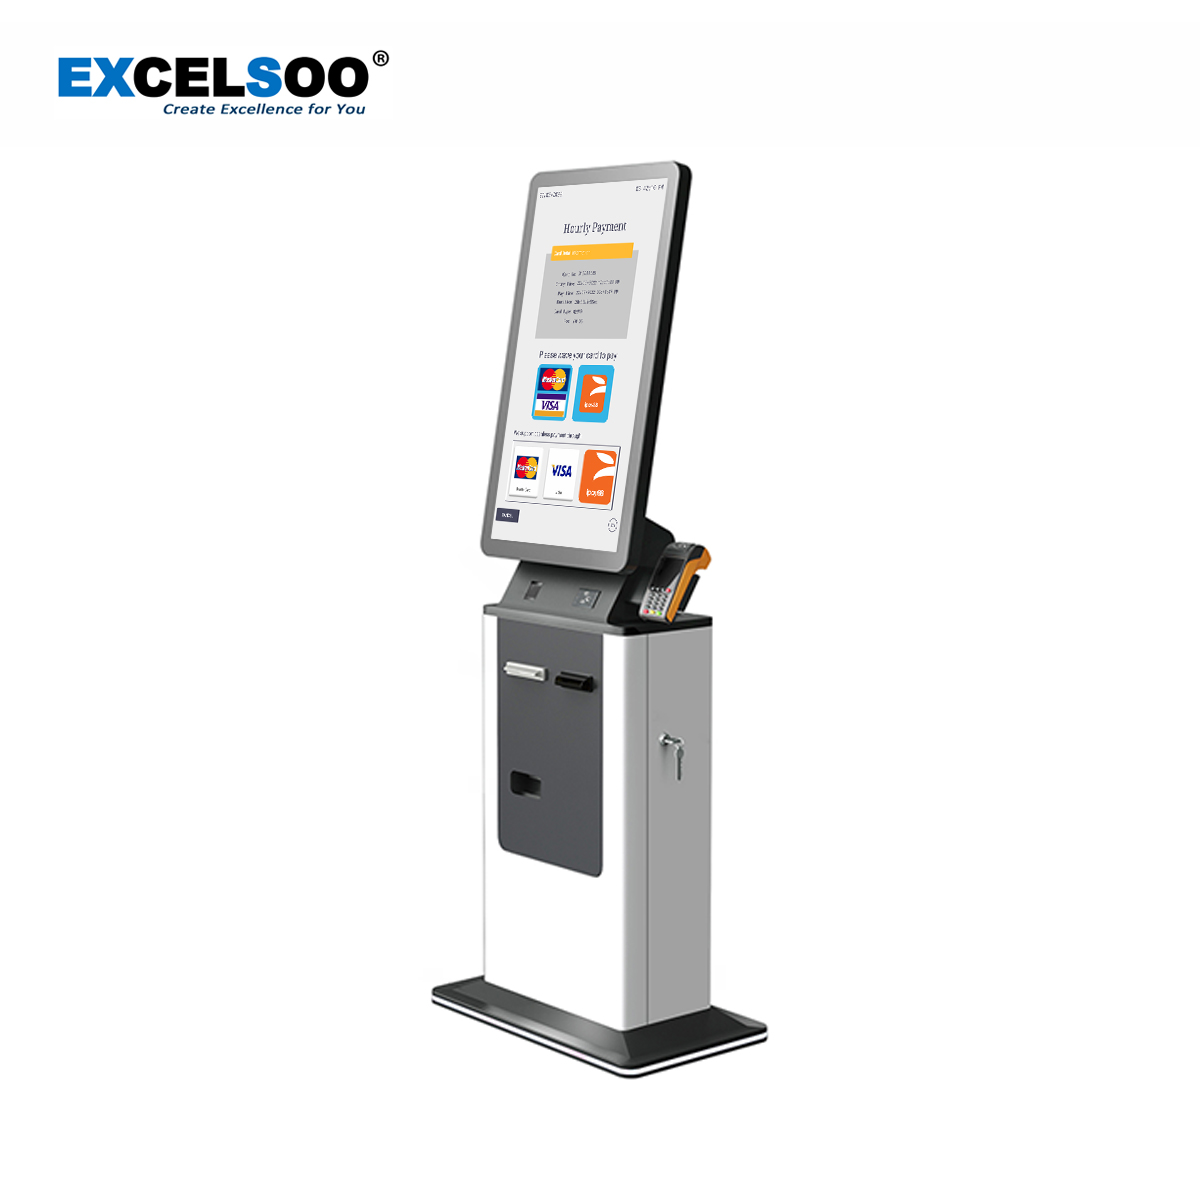 Pay on Foot Auto Payment Kiosk APS-E6 for Cashless Parking APS-E6 from Excelsoo